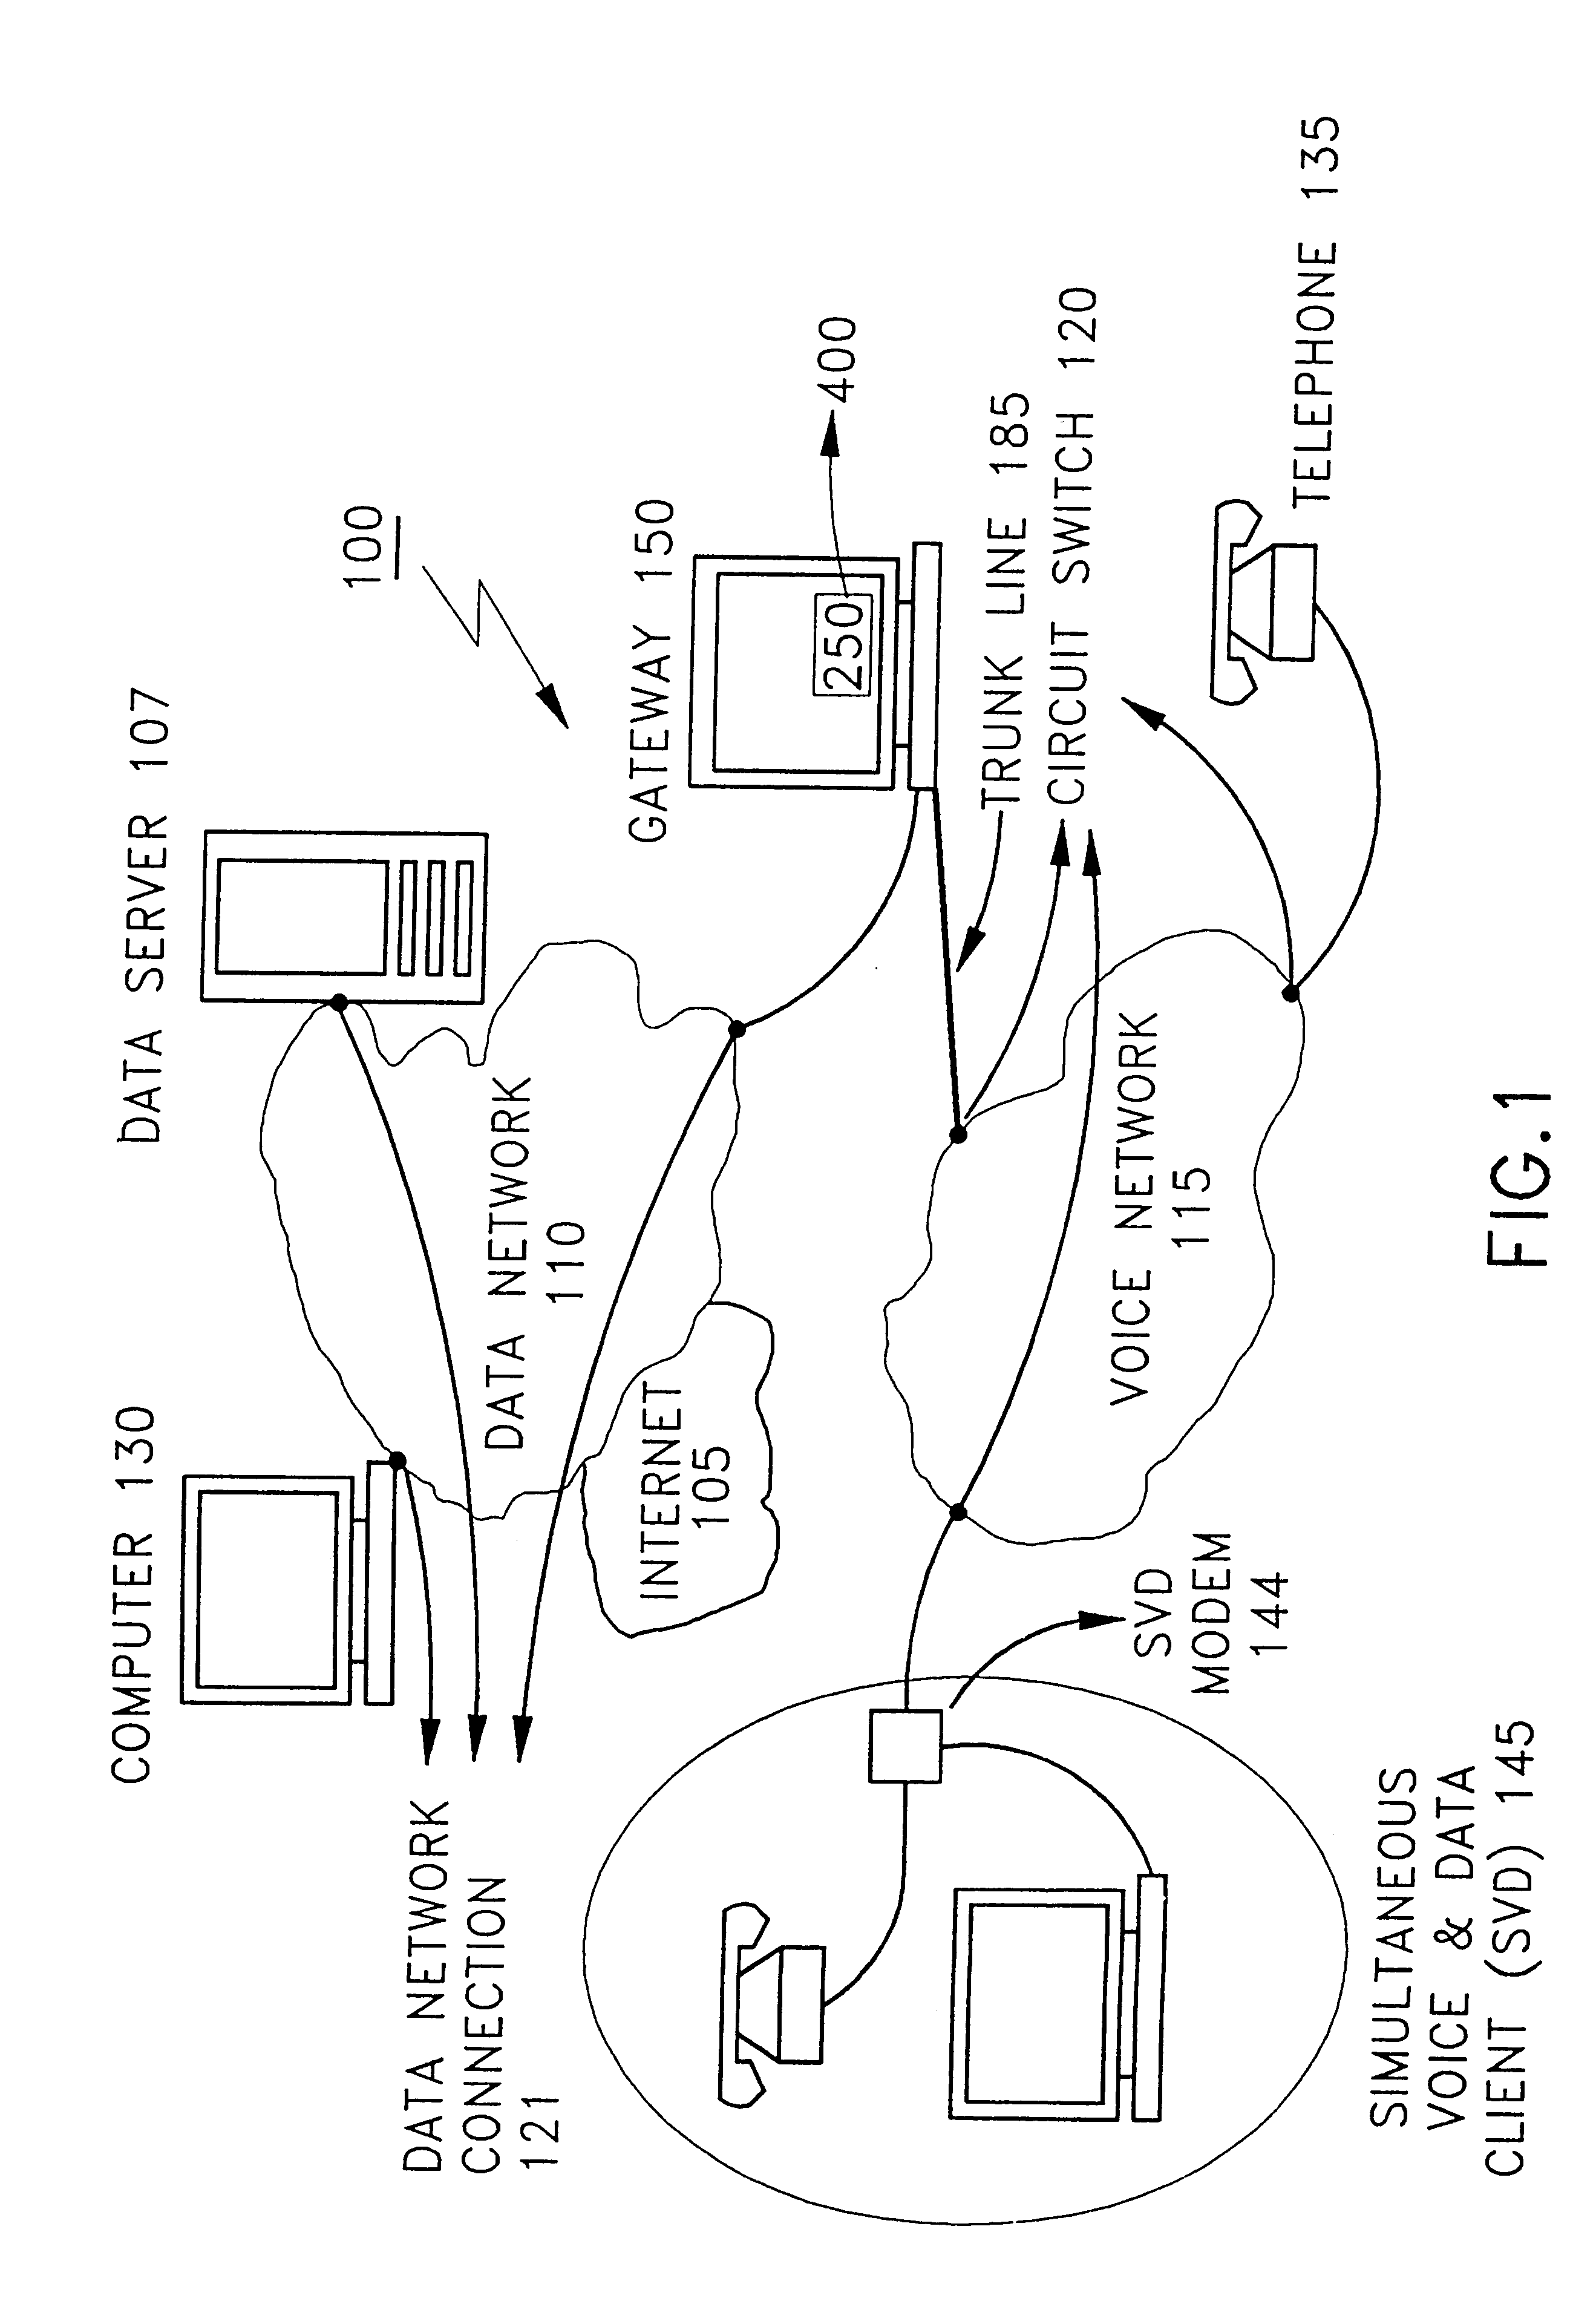 Multipoint simultaneous voice and data services using a media splitter gateway architecture